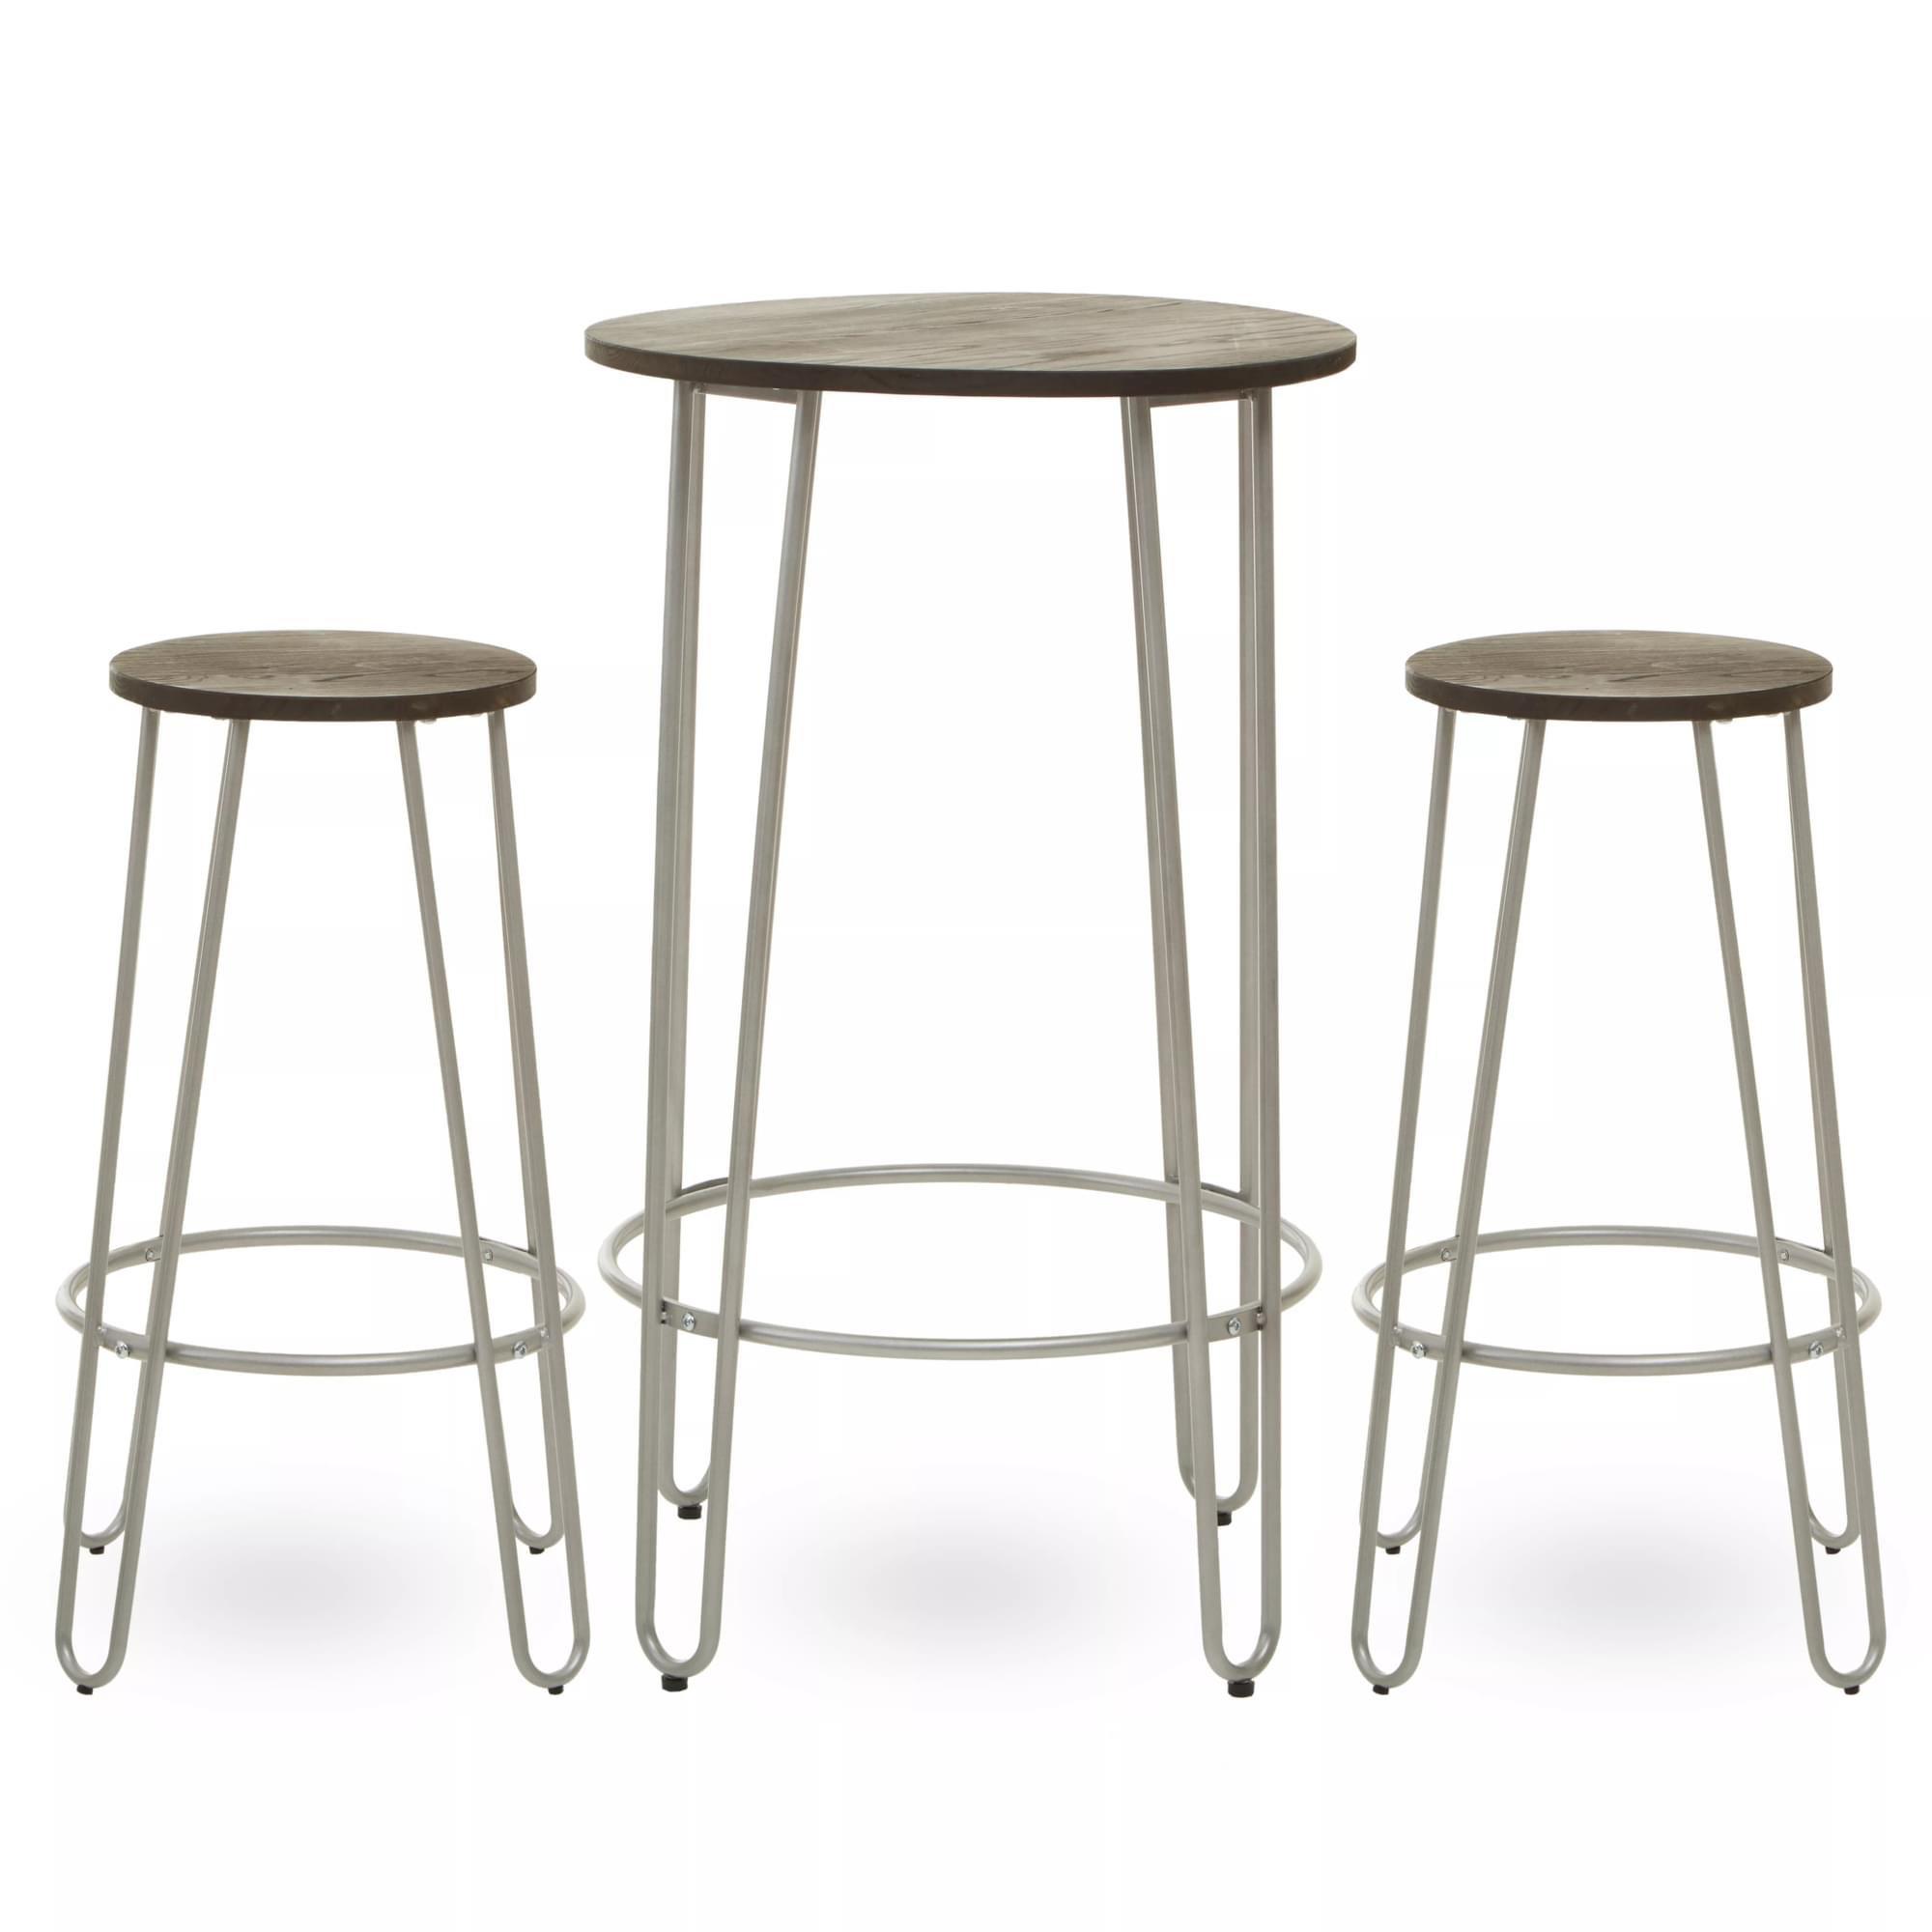 Interiors by Premier Set of 3 Black Frame Bar Table Stool Set , Hairpin Stool for Kitchen Counter, E